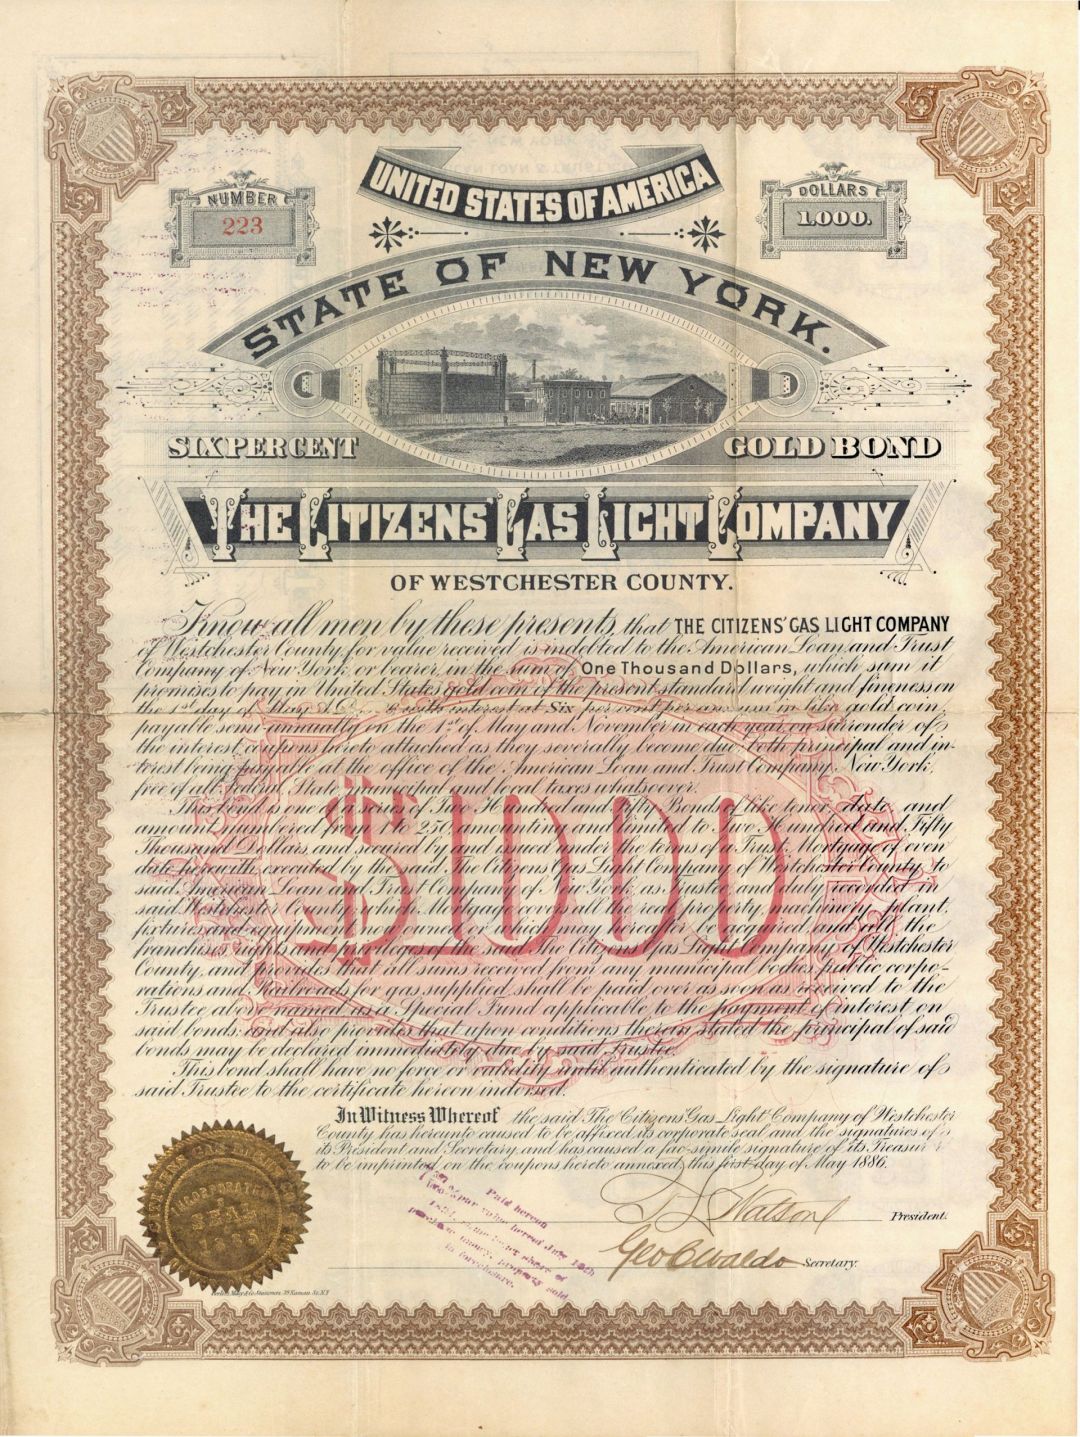 Citizens Gas Light Co. of Westchester County - $1,000 Utility Bond